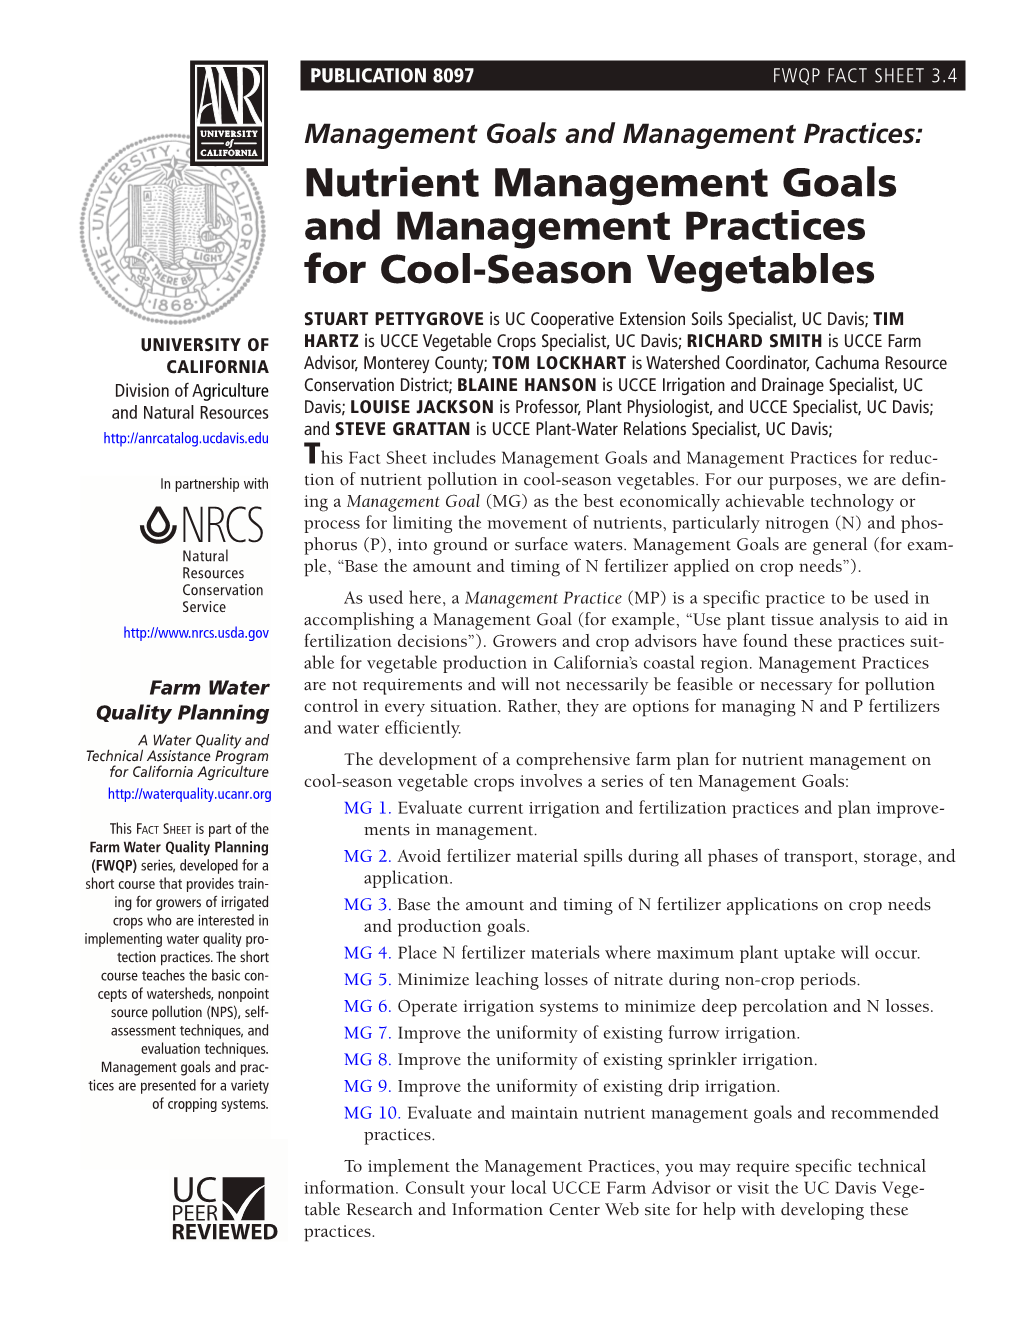 Nutrient Management Goals and Recommended Practices for Cool